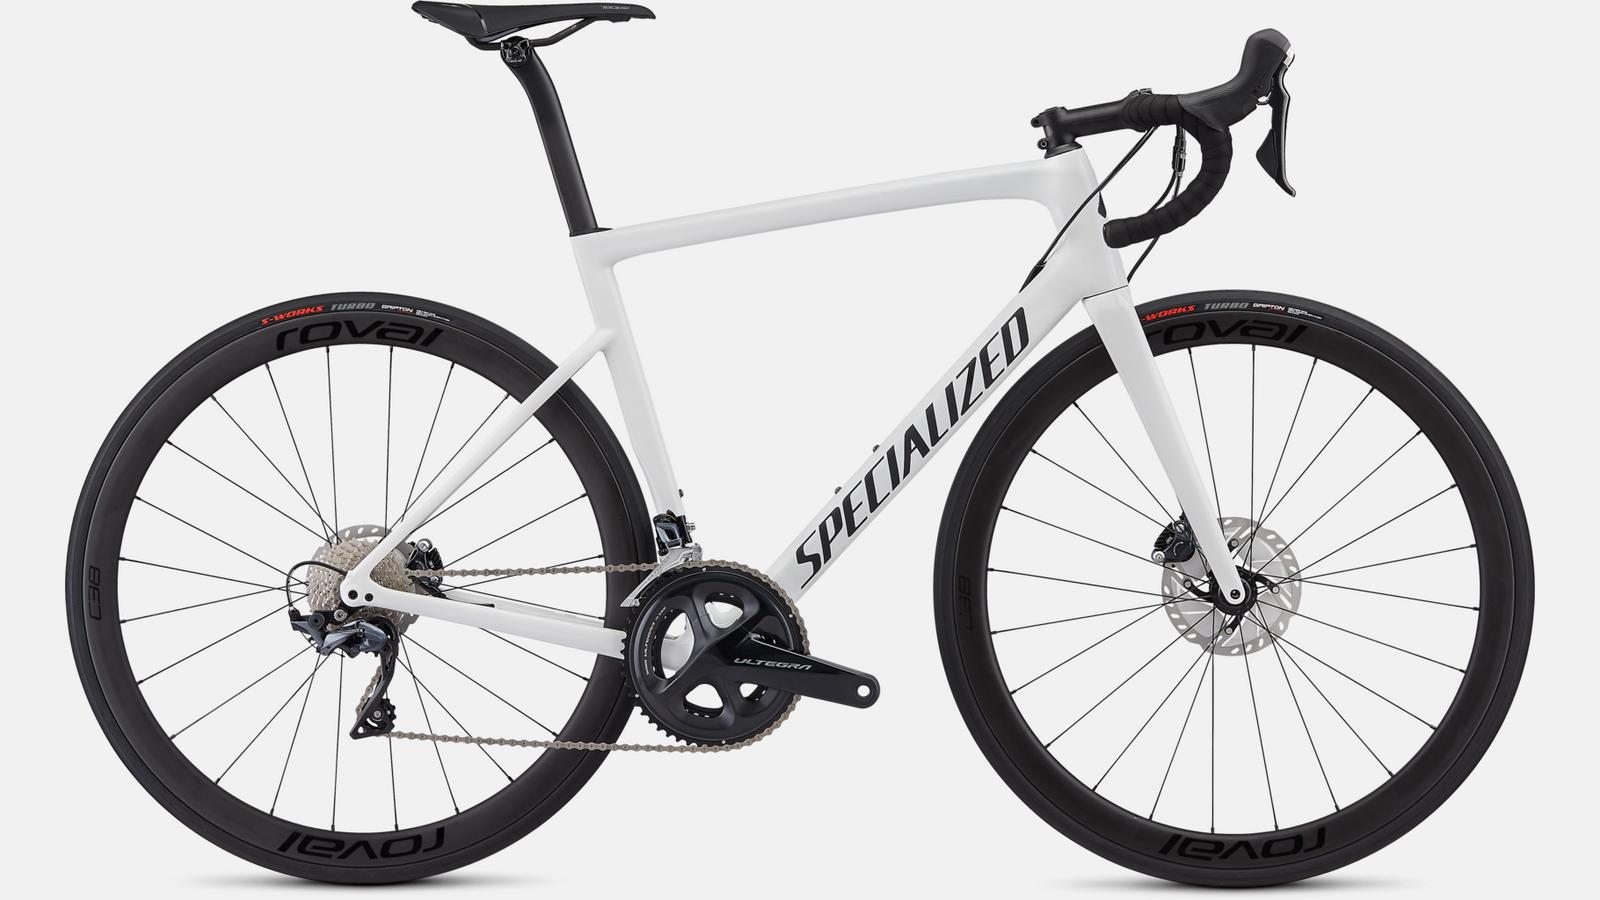 Touch-up paint for 2019 Specialized Men's Tarmac Disc Expert - Satin White